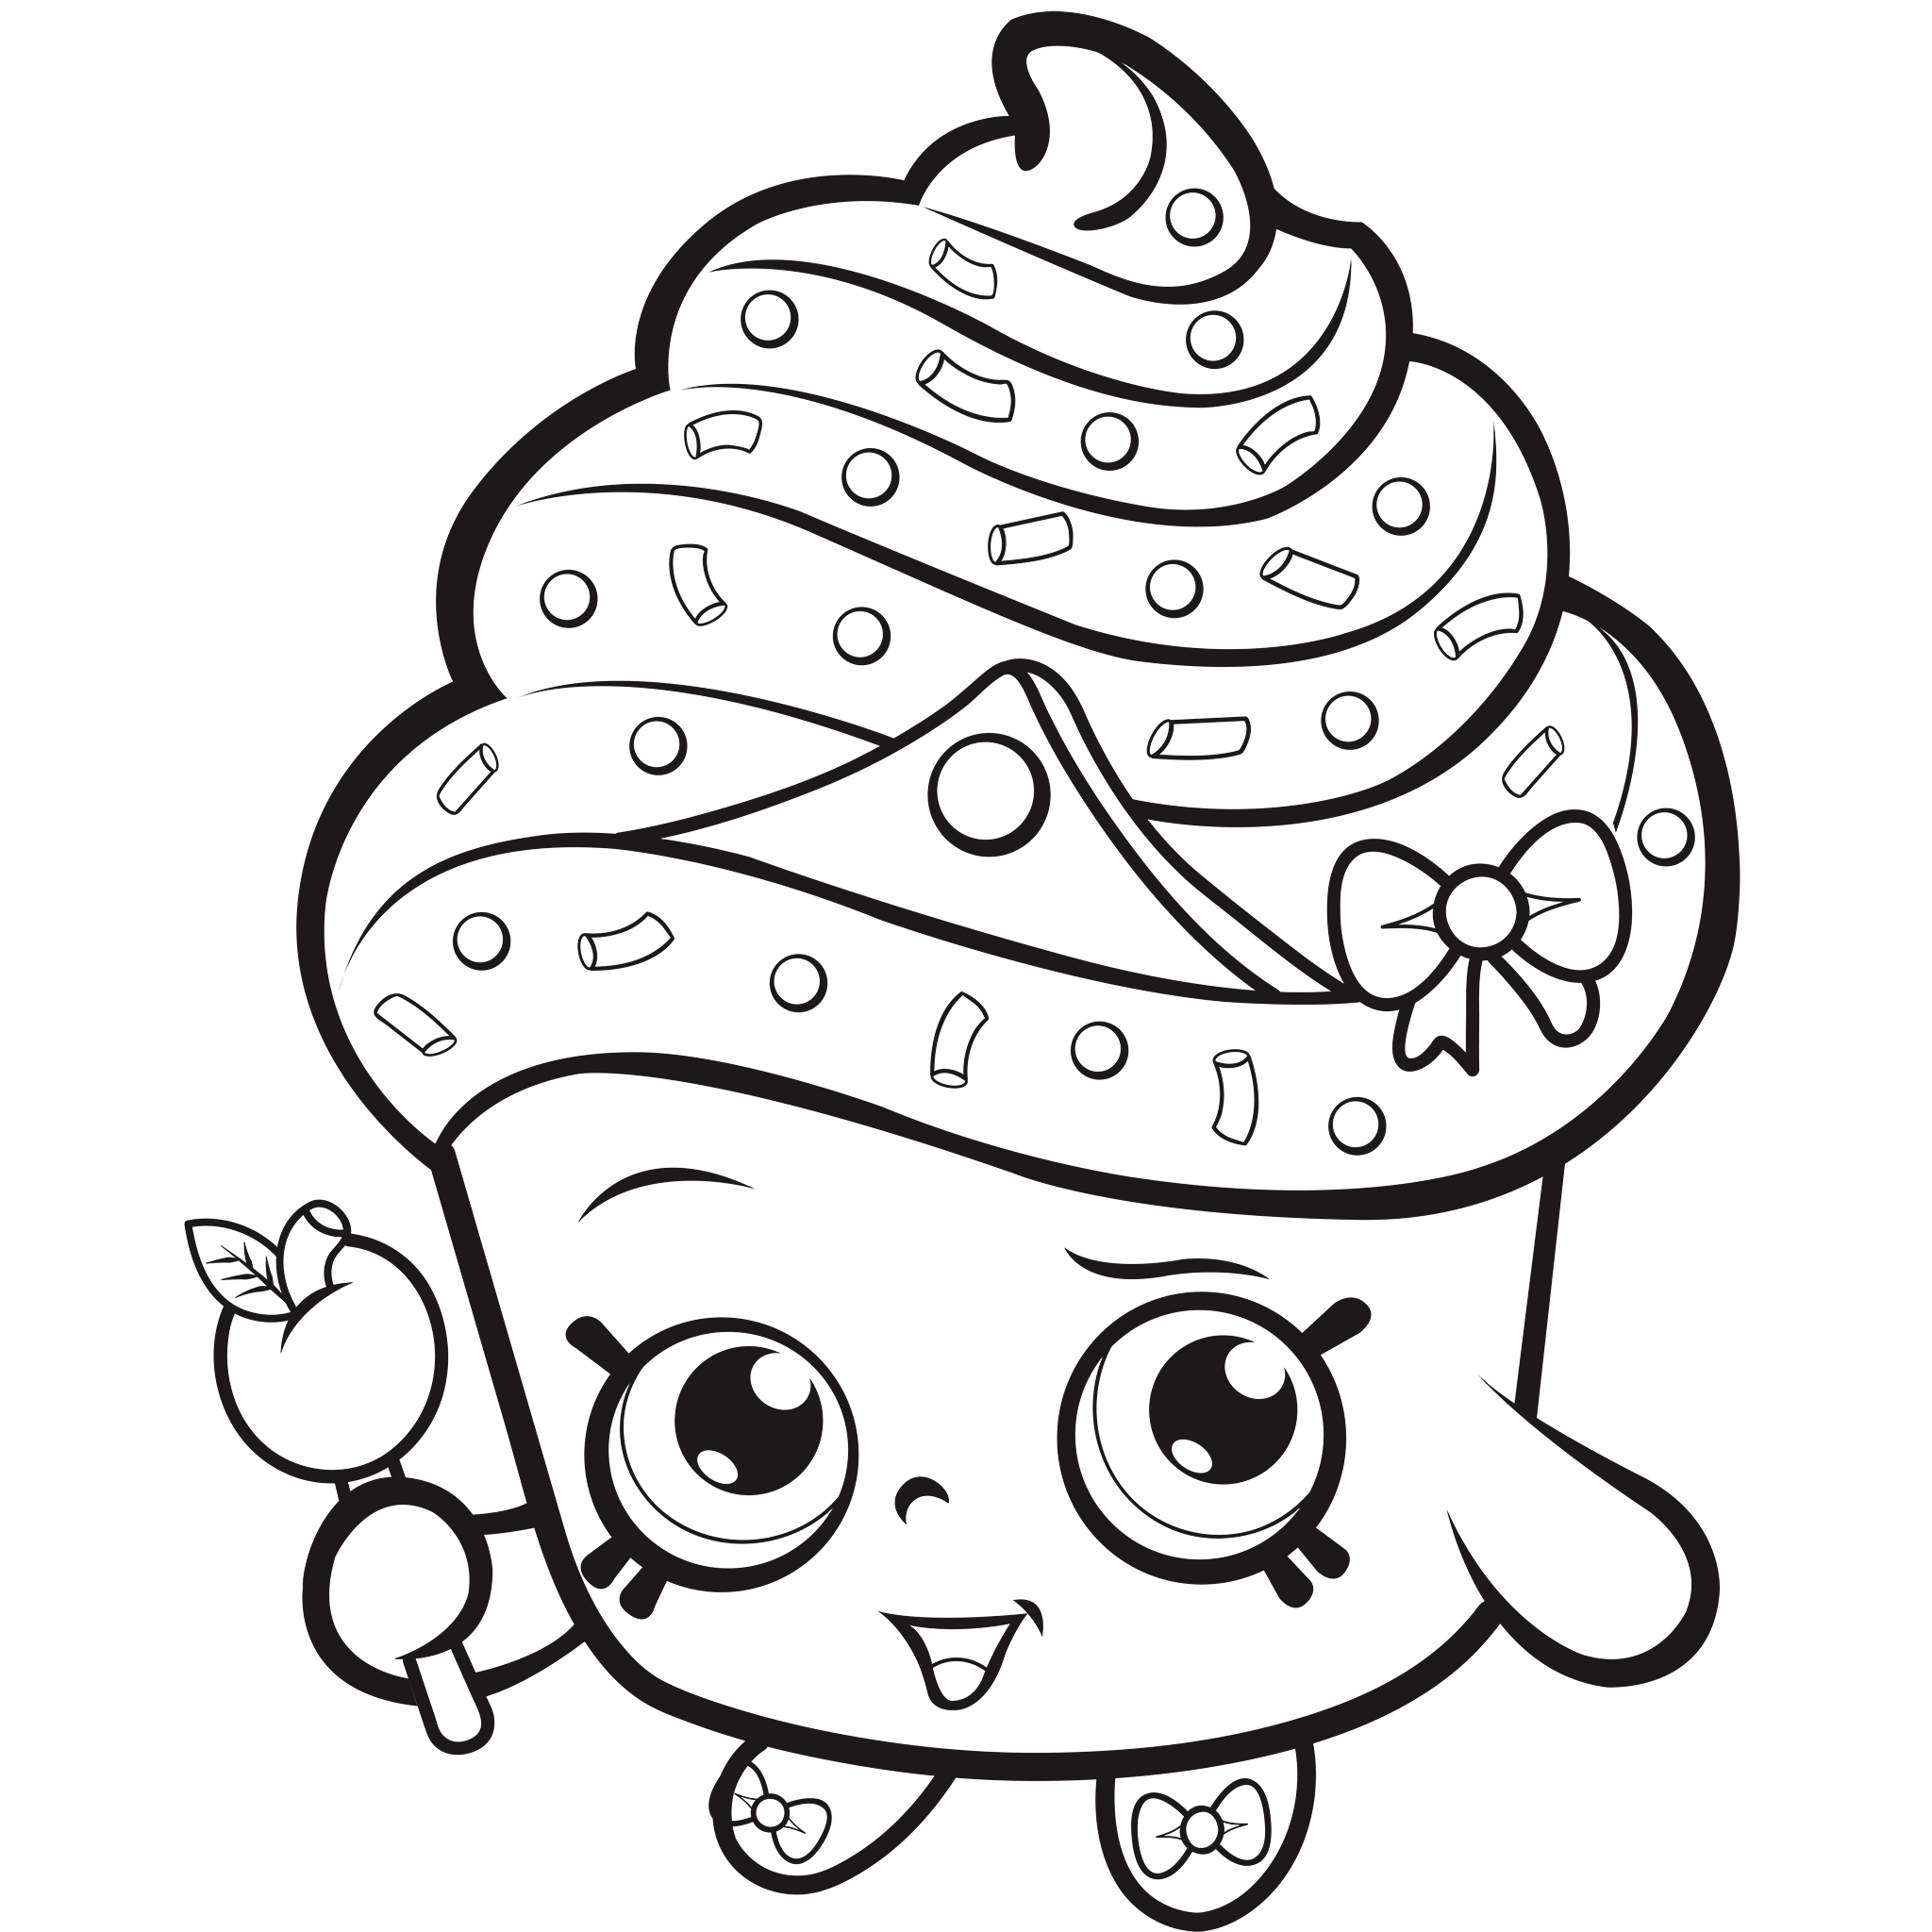 Shopkins Coloring Pages - Cupcake Queen